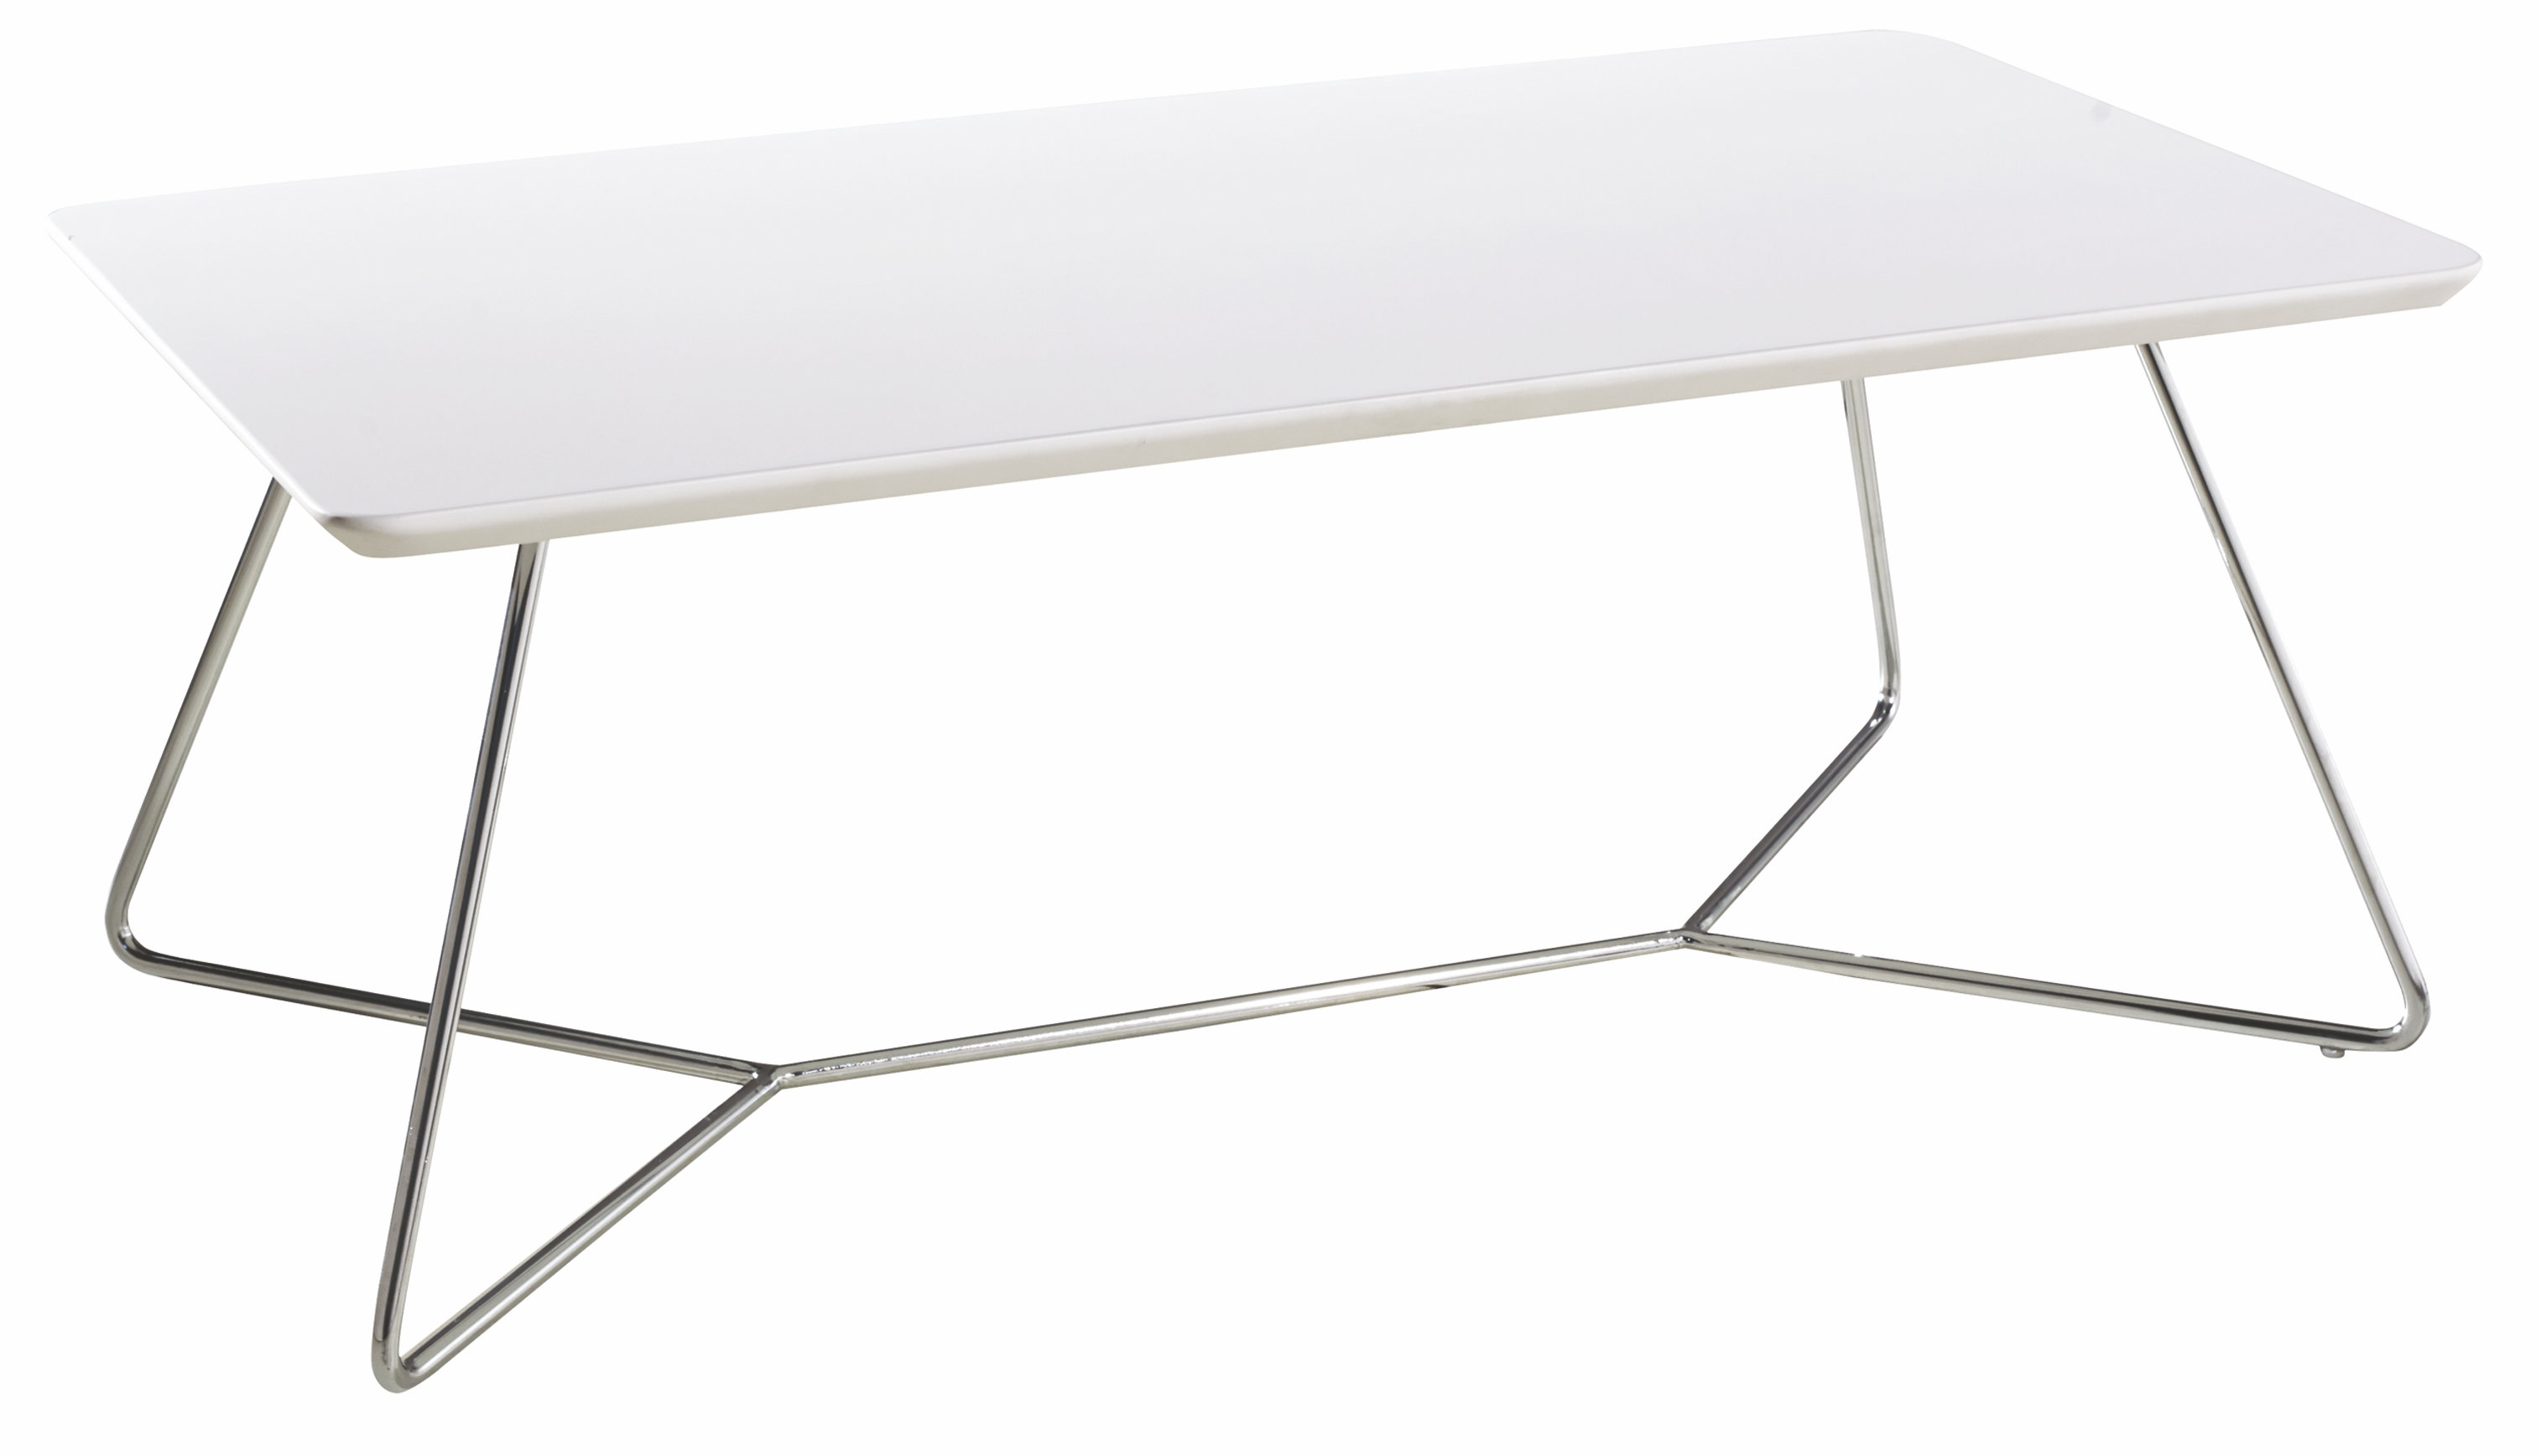 Fraser 110 coffee table